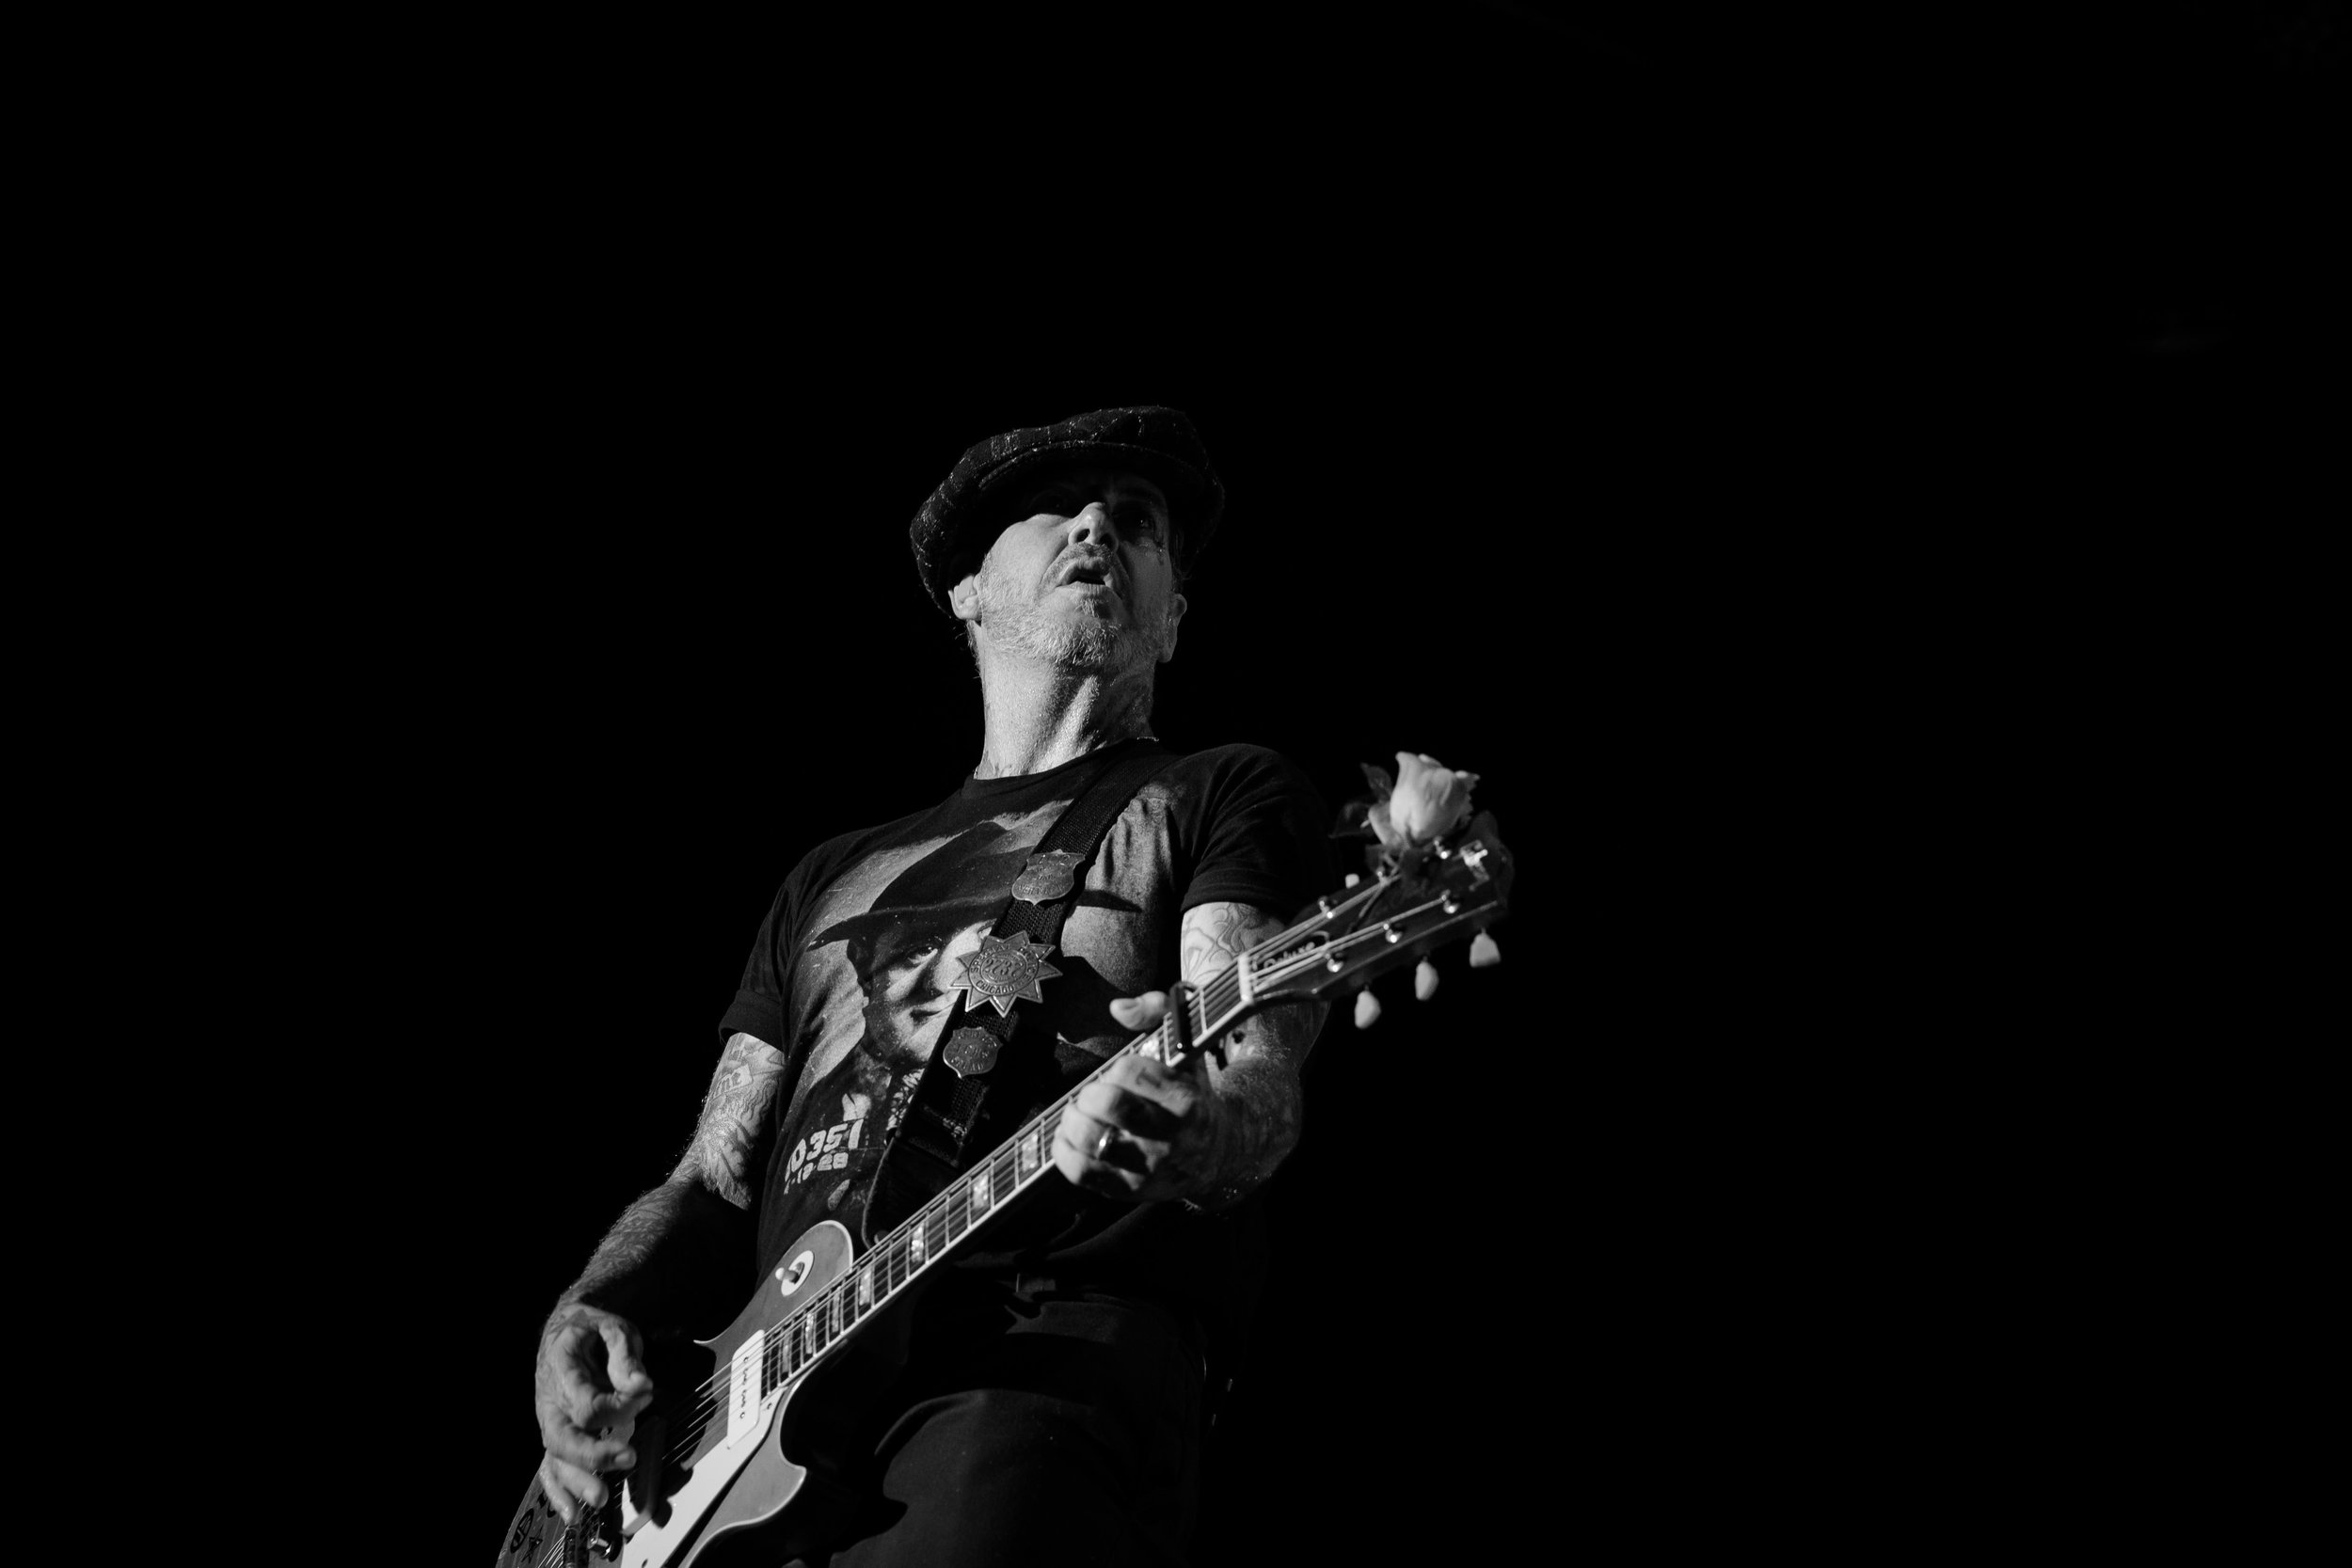  Mike Ness of Social Distortion shot at Surf City Blitz 